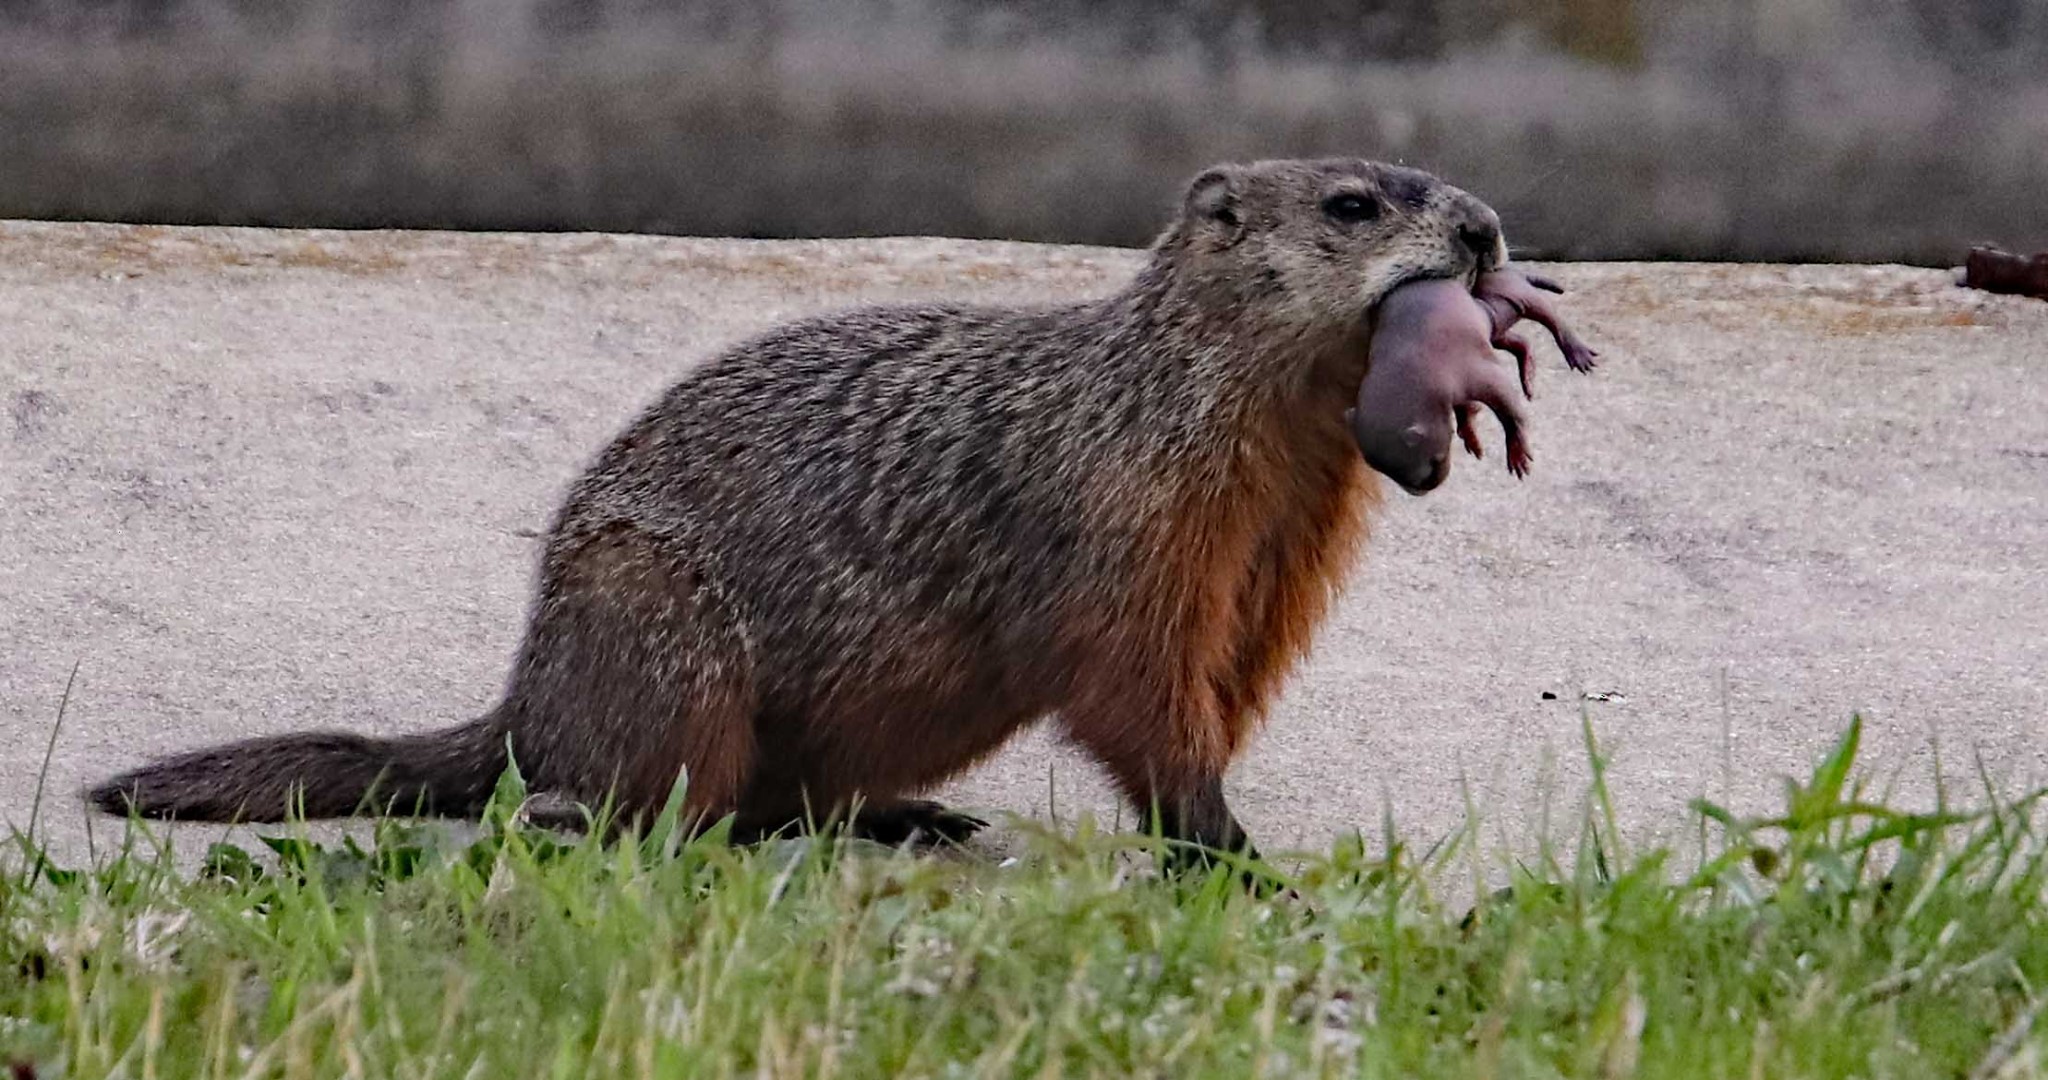 A woodchuck carrying a kit in its mouth.